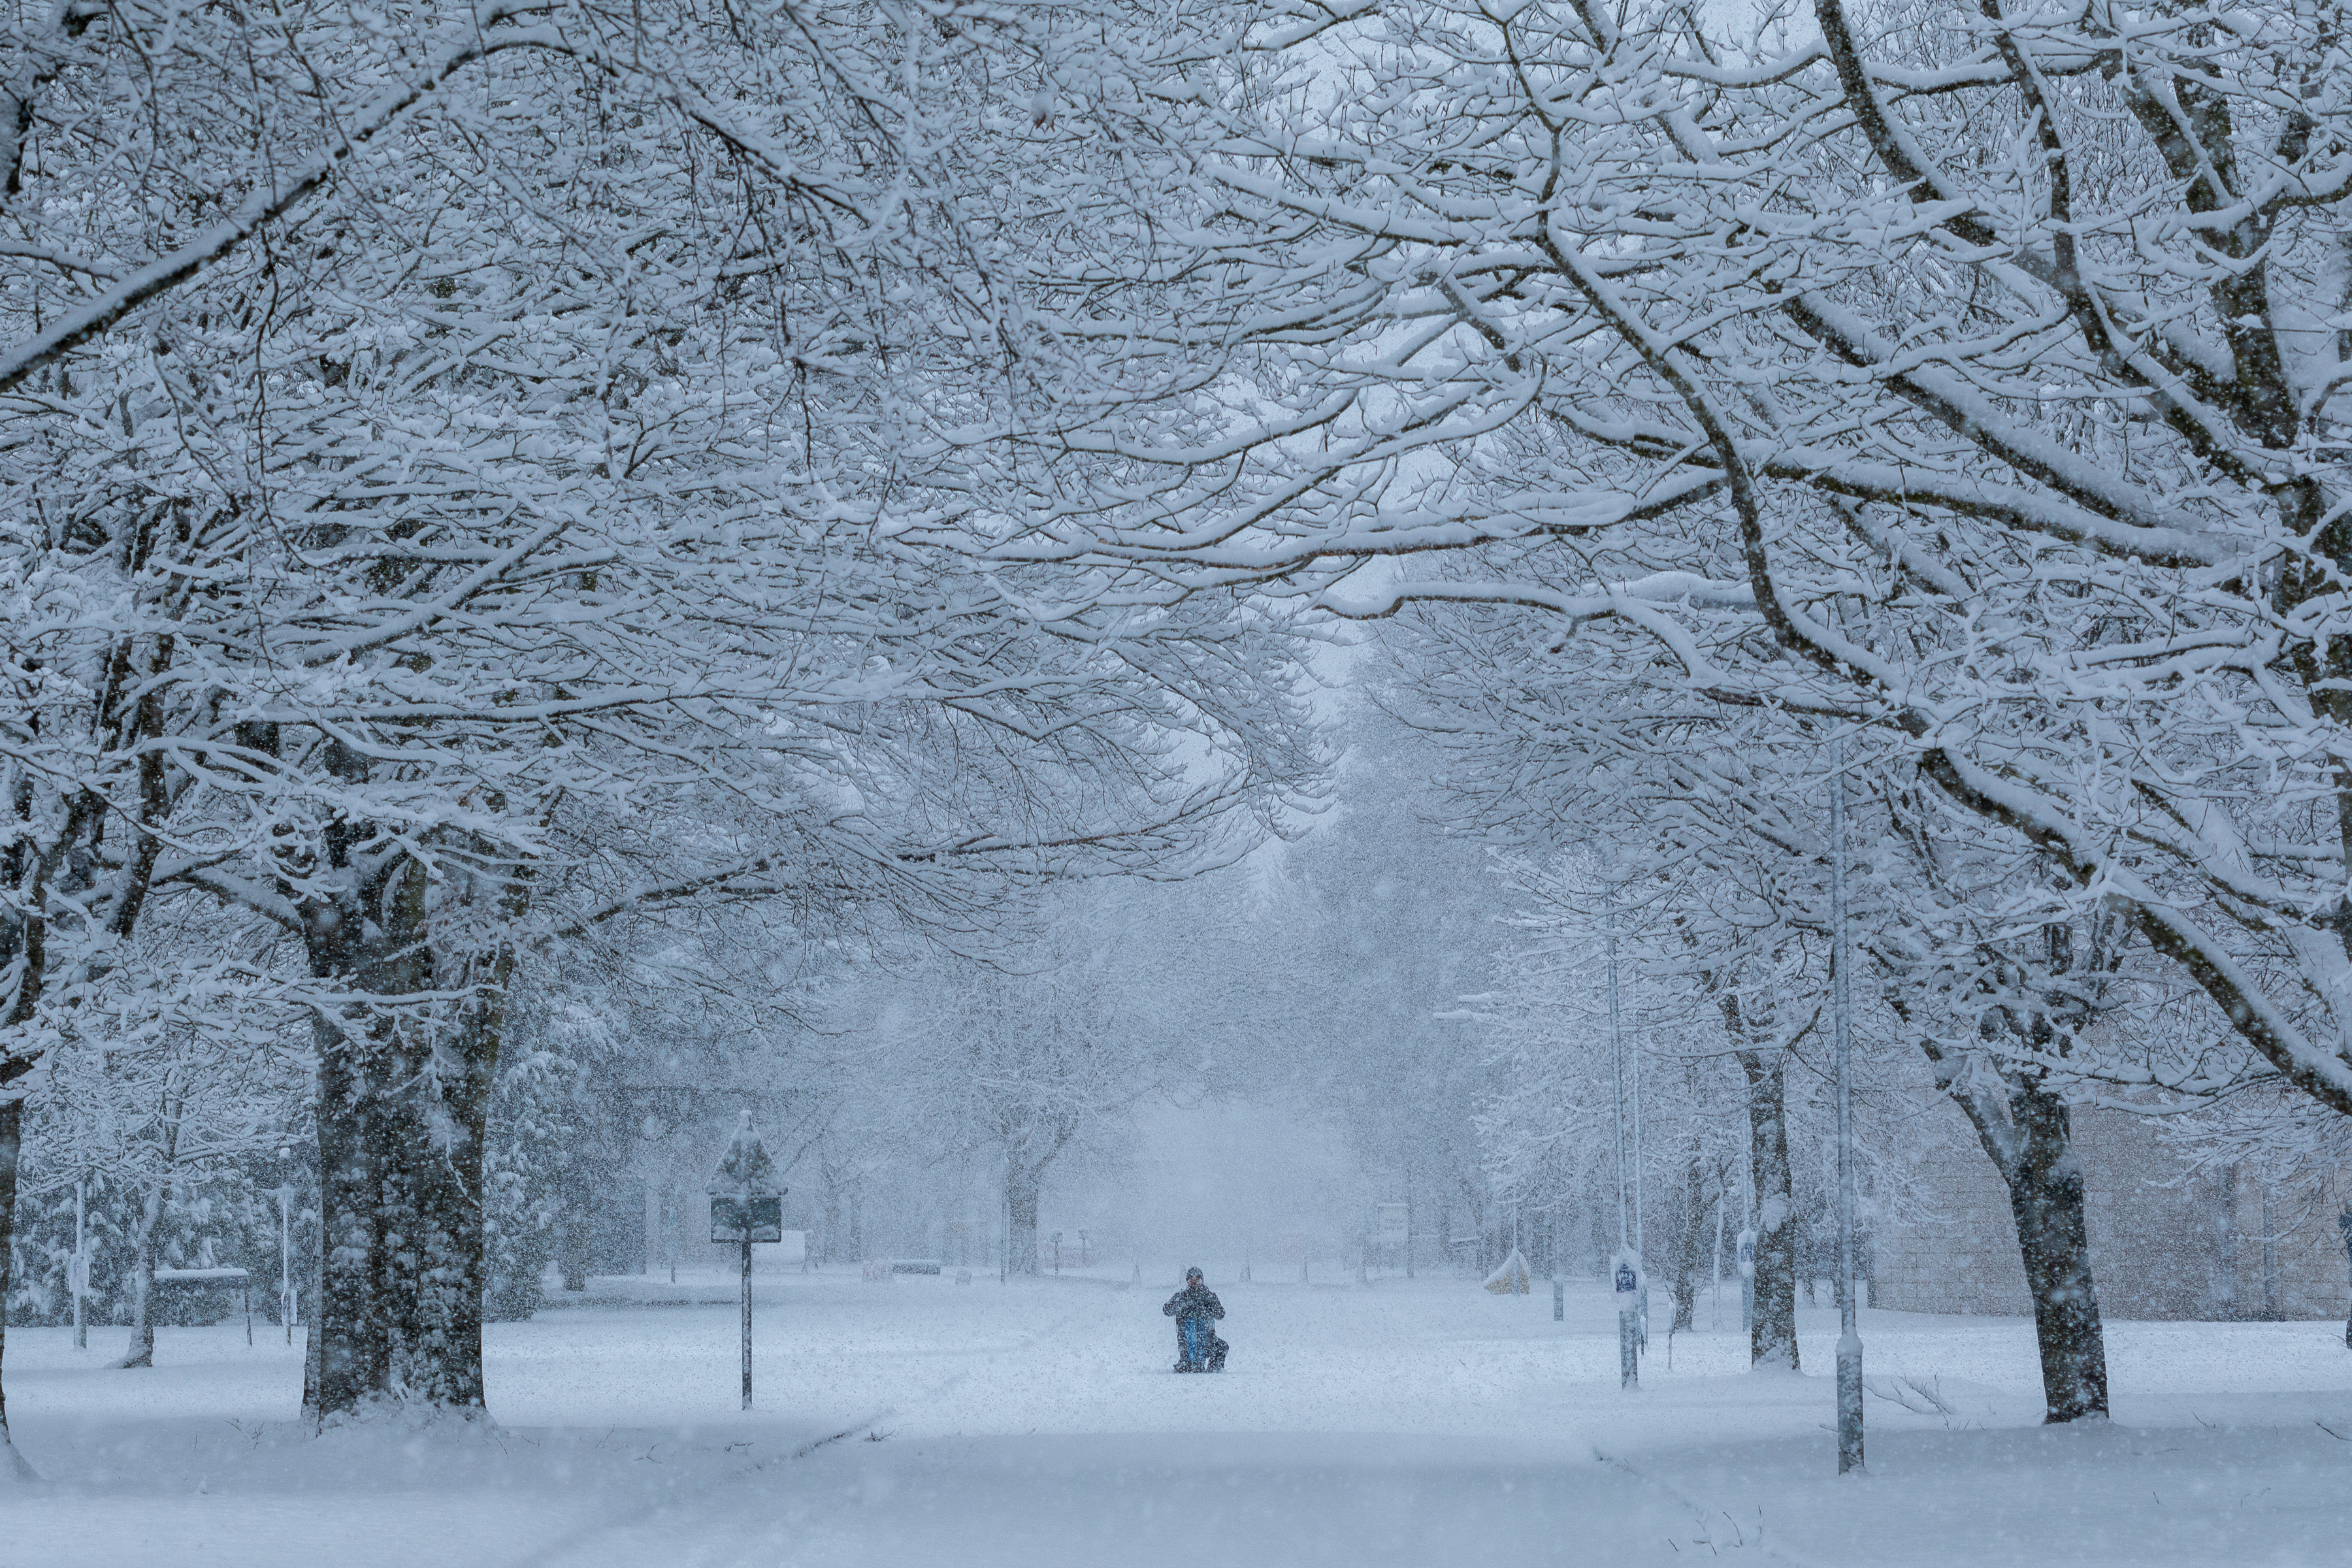 Man kneels down amid a snowy street and trees.